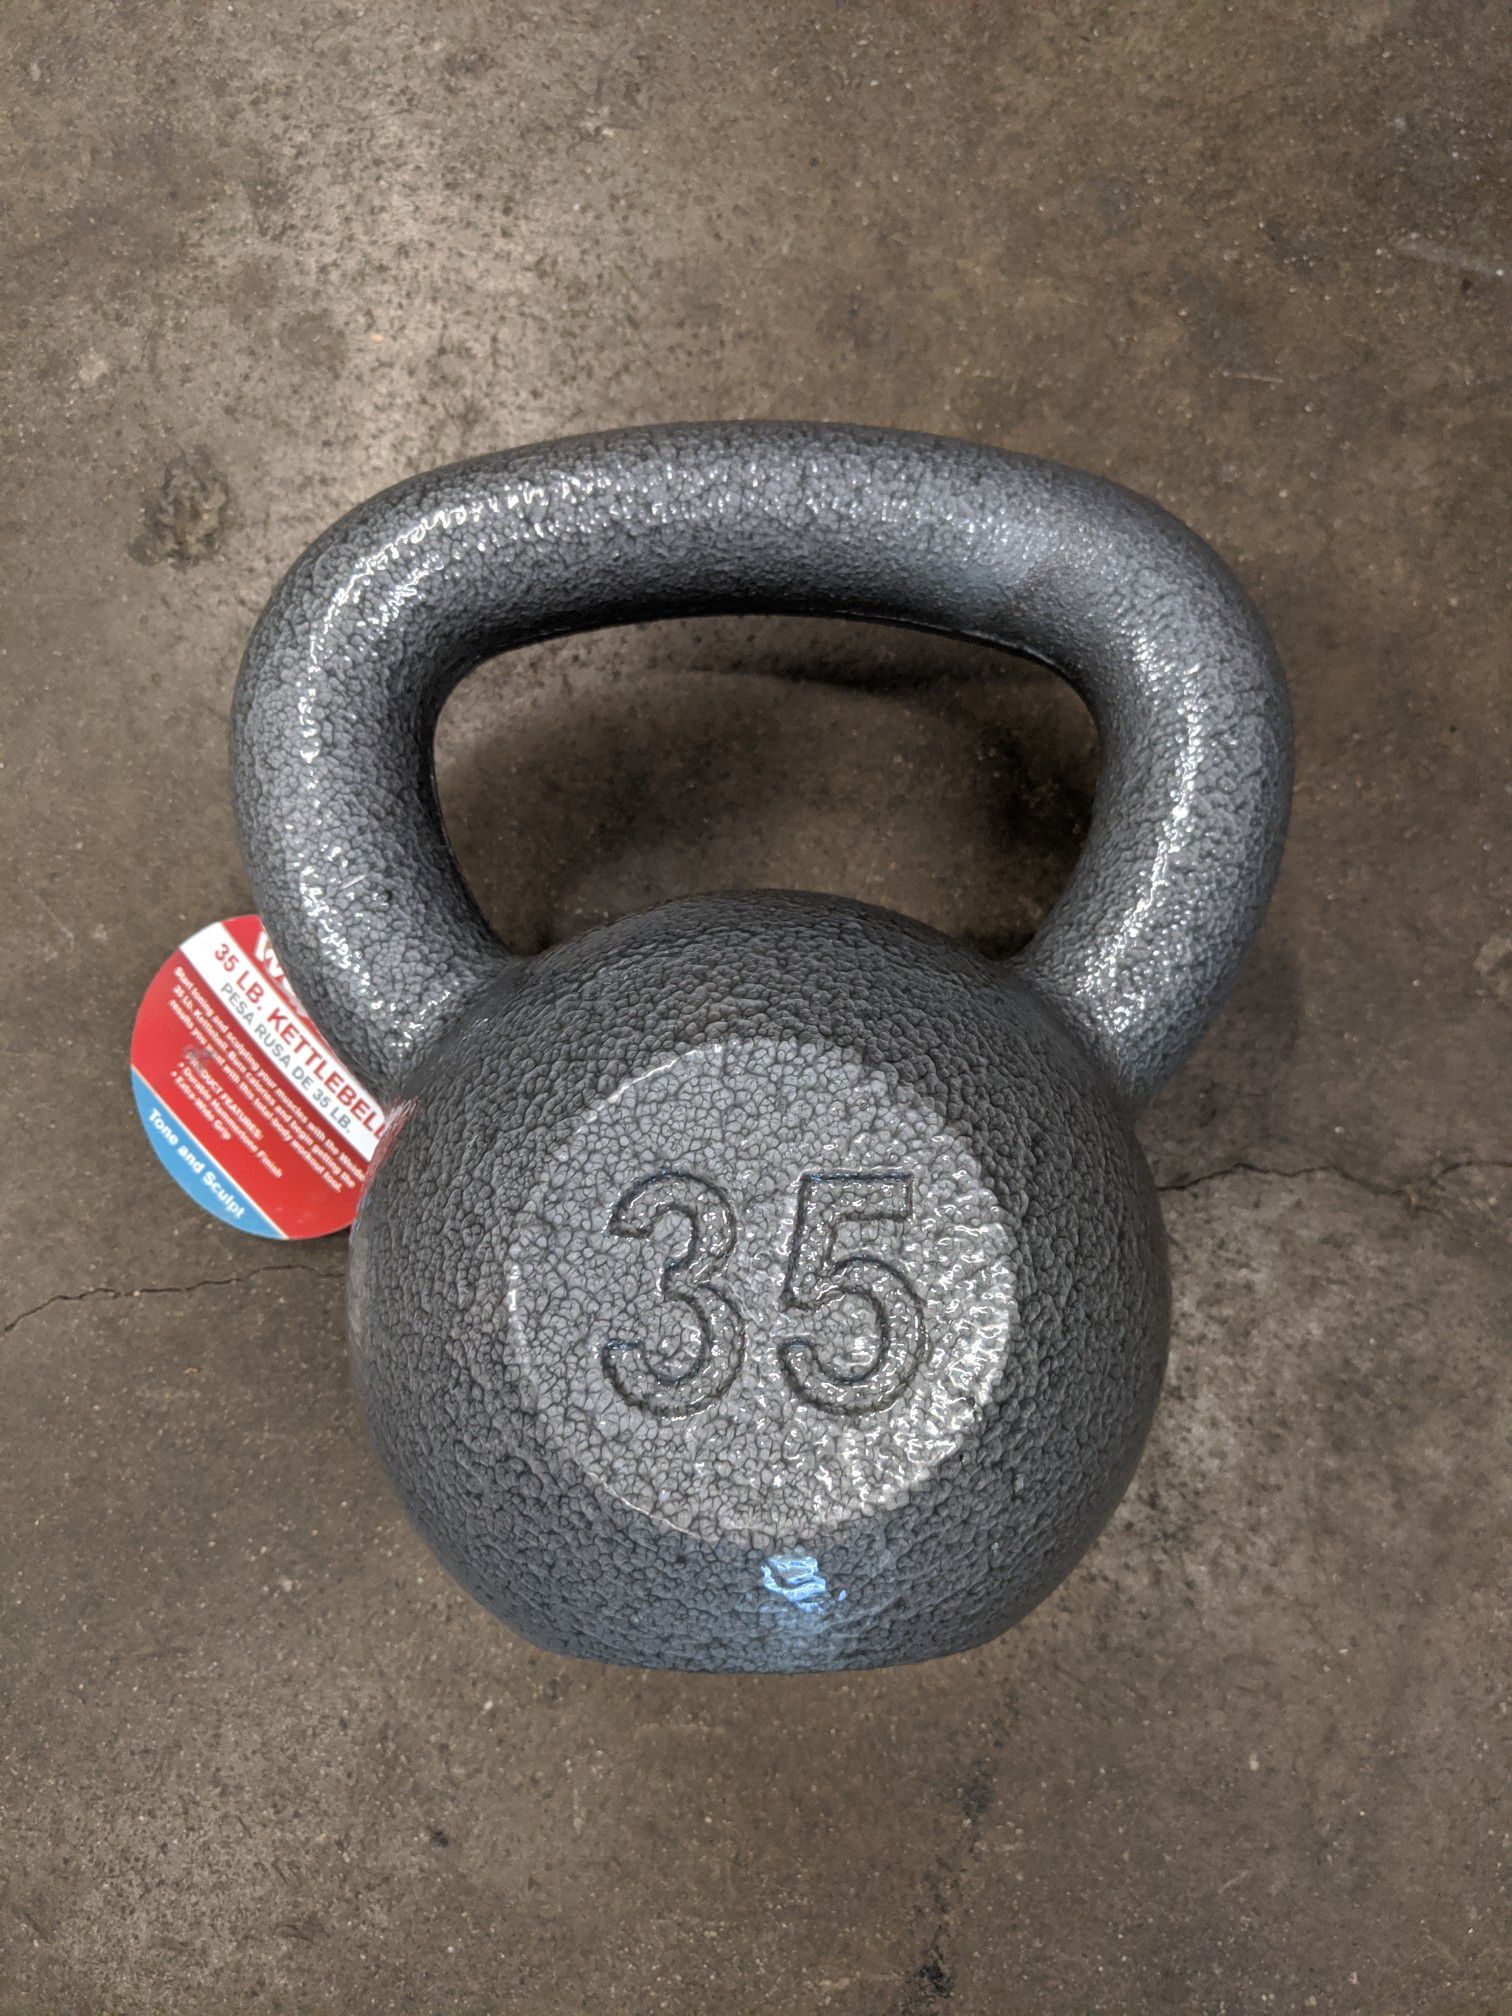 New Kettlebell 35lbs by Weider fitness